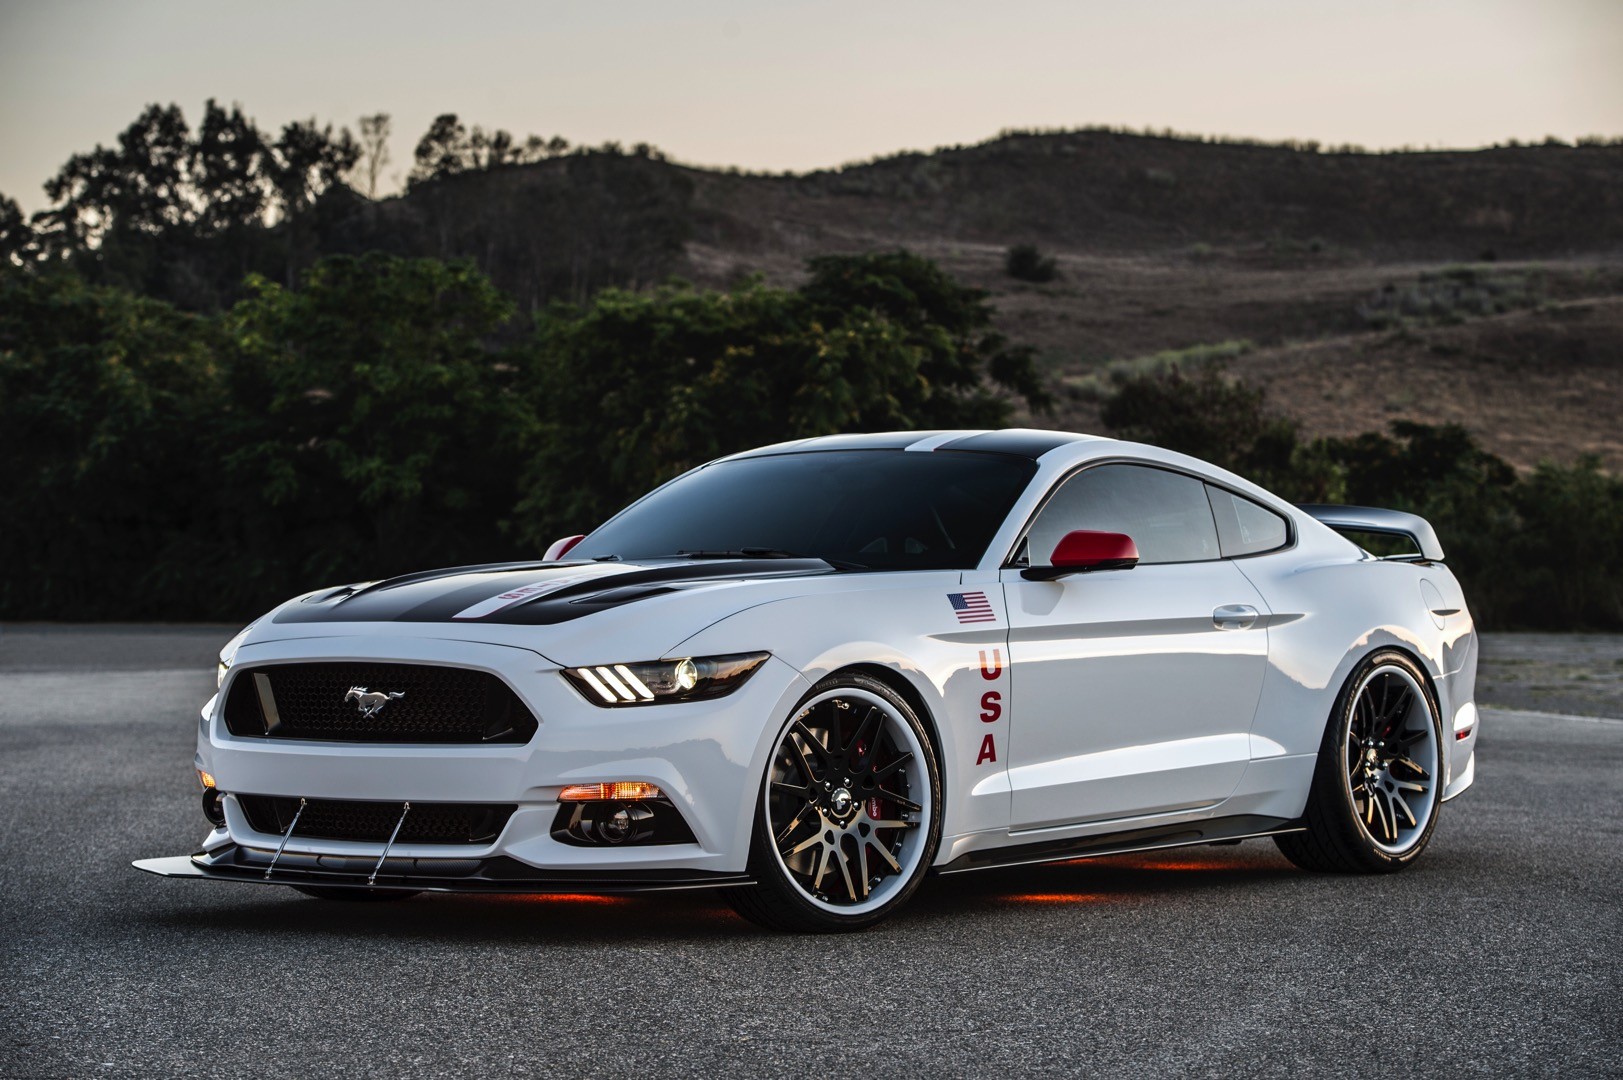 ford-unveils-mustang-apollo-edition-amid-nasas-recent-findings-photo-gallery_5